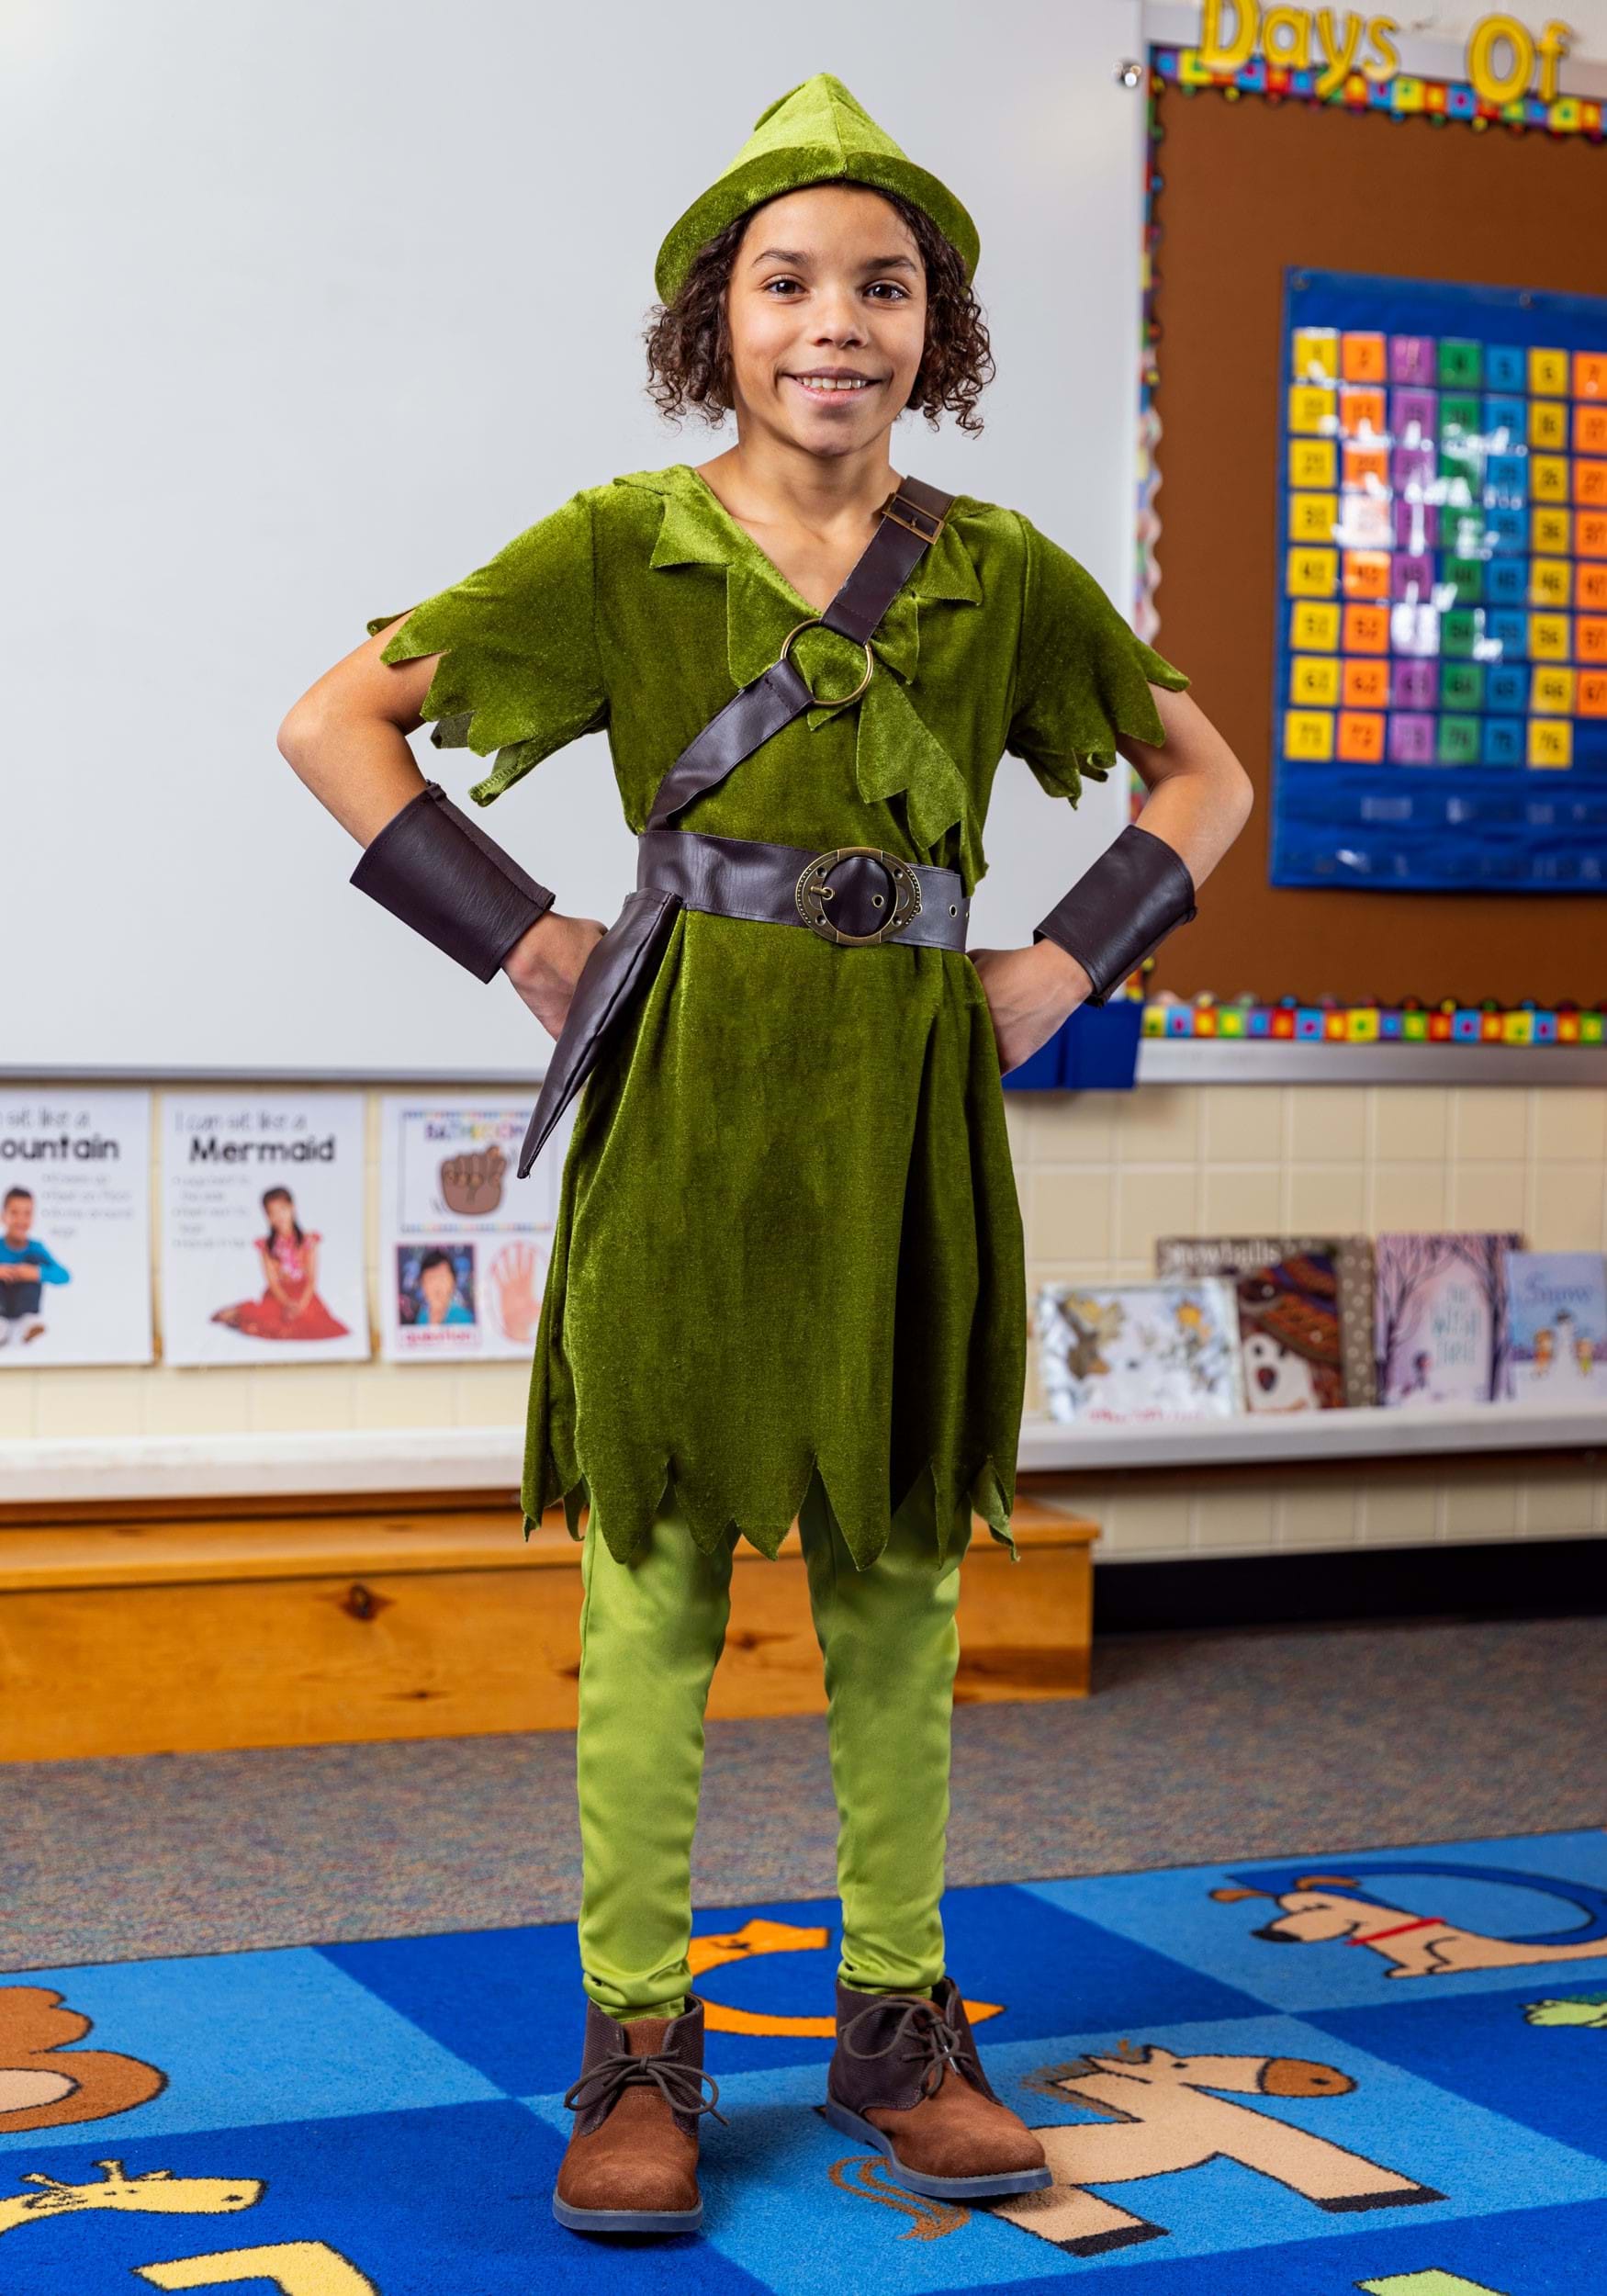 Boy's Classic Peter Pan Costume , Exclusive , Made By Us